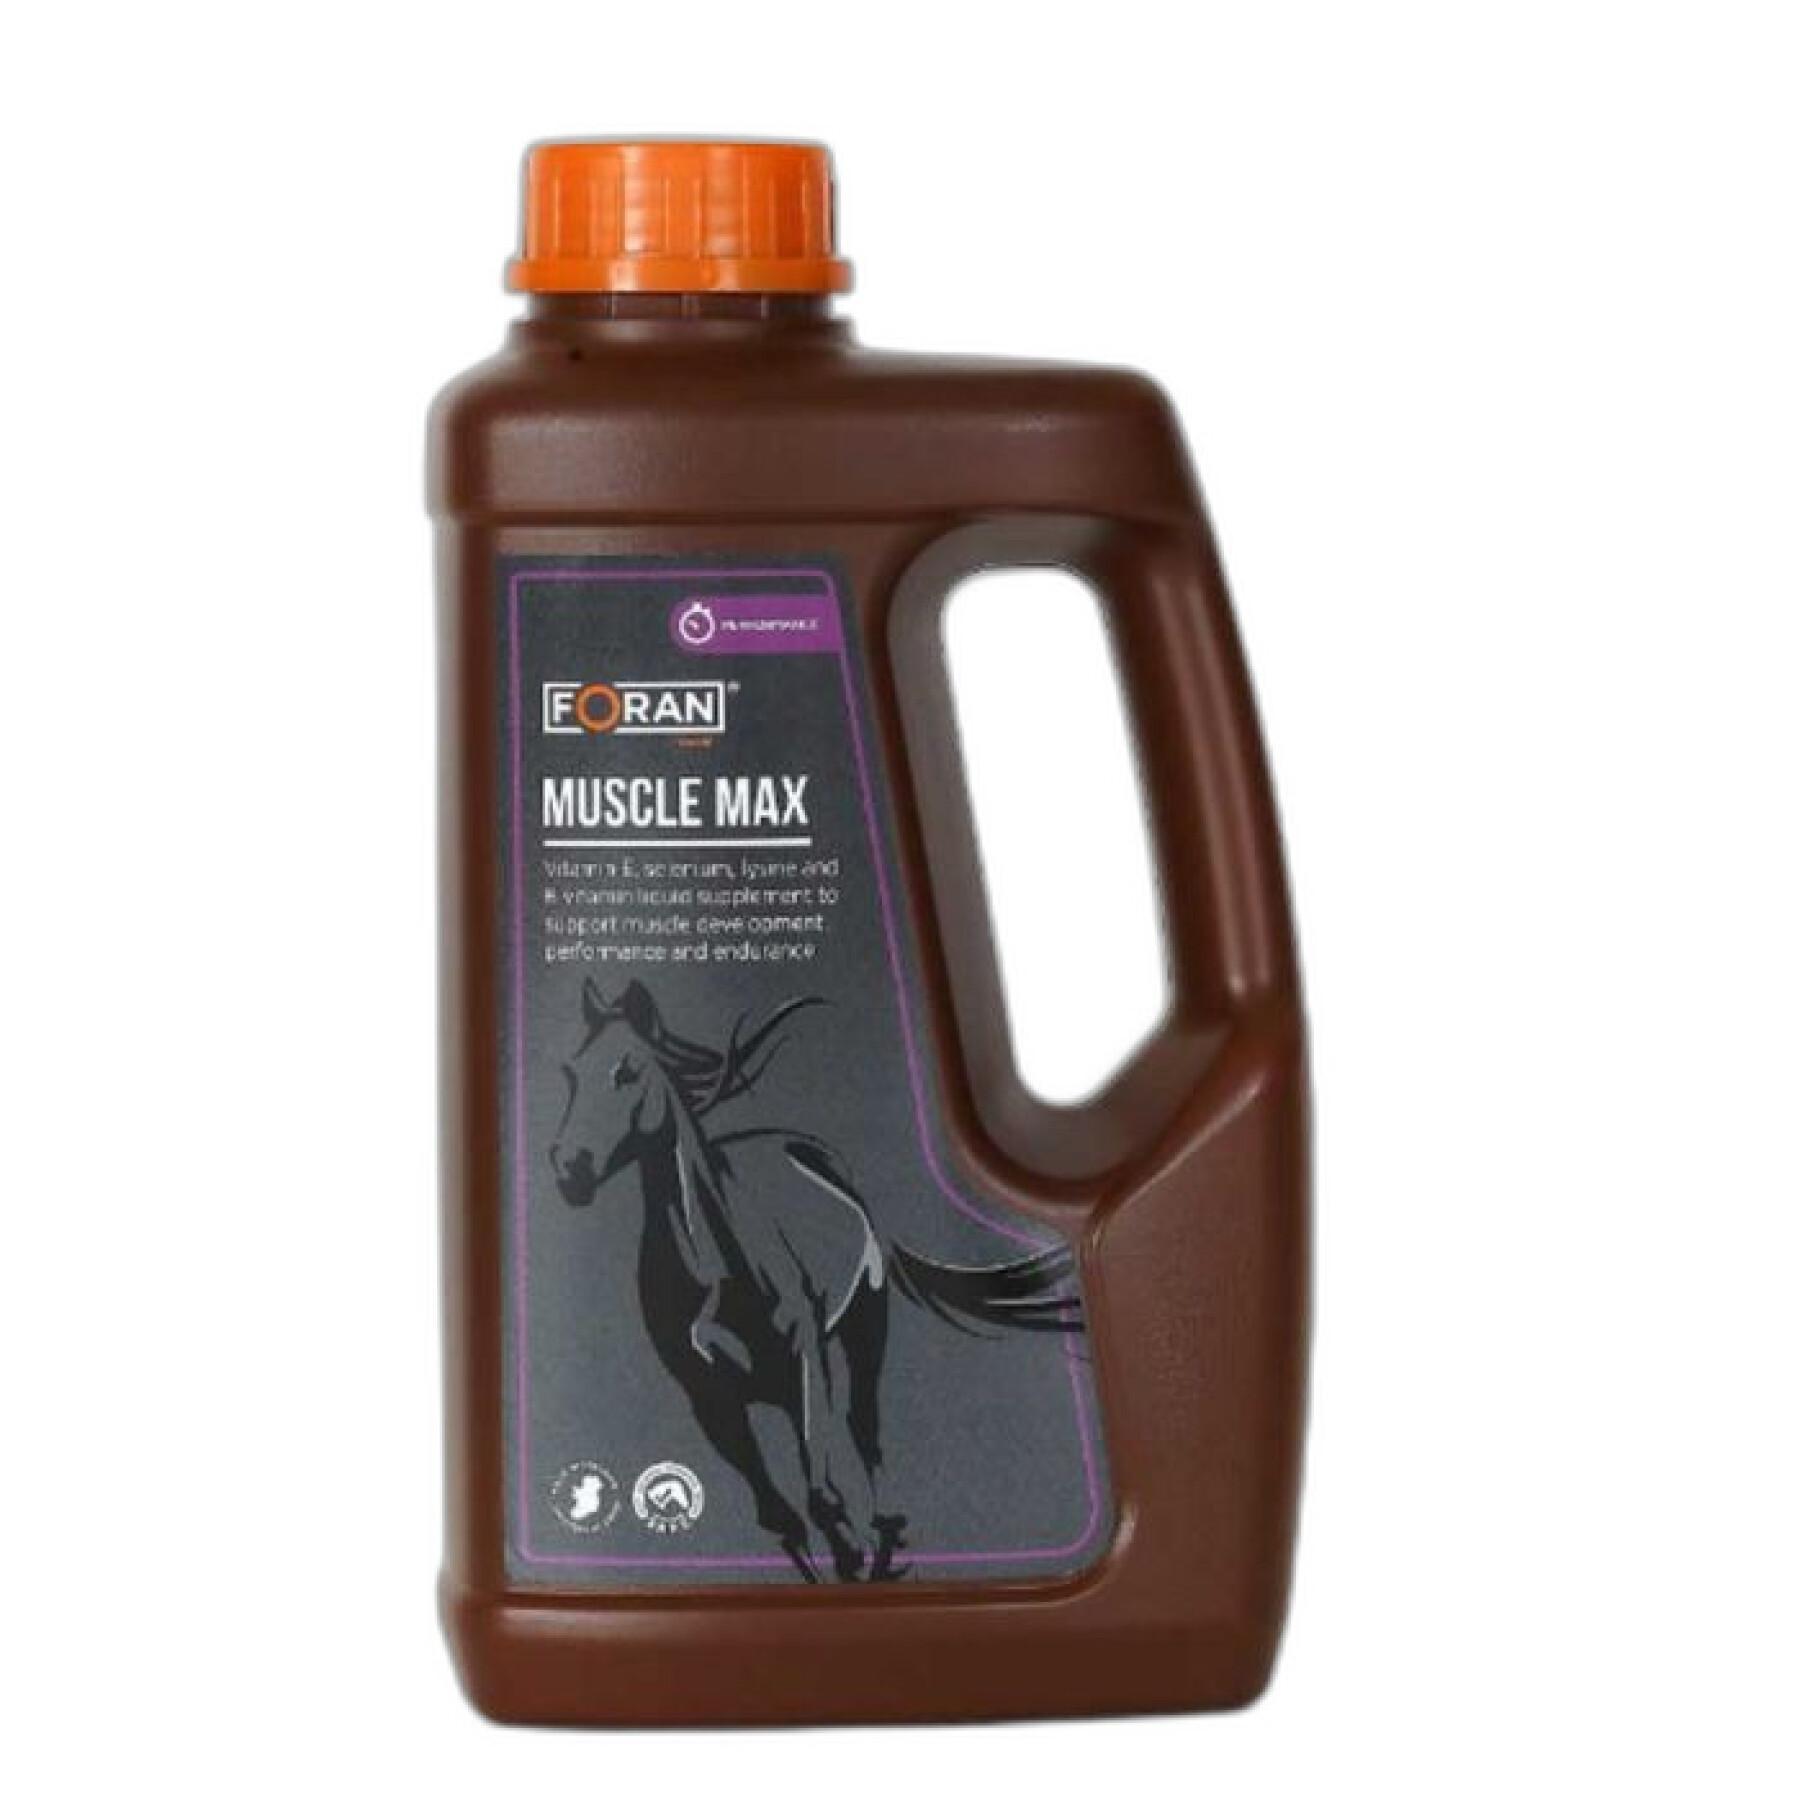 Complementary joint support for horses Foran Muscle Max 1 L